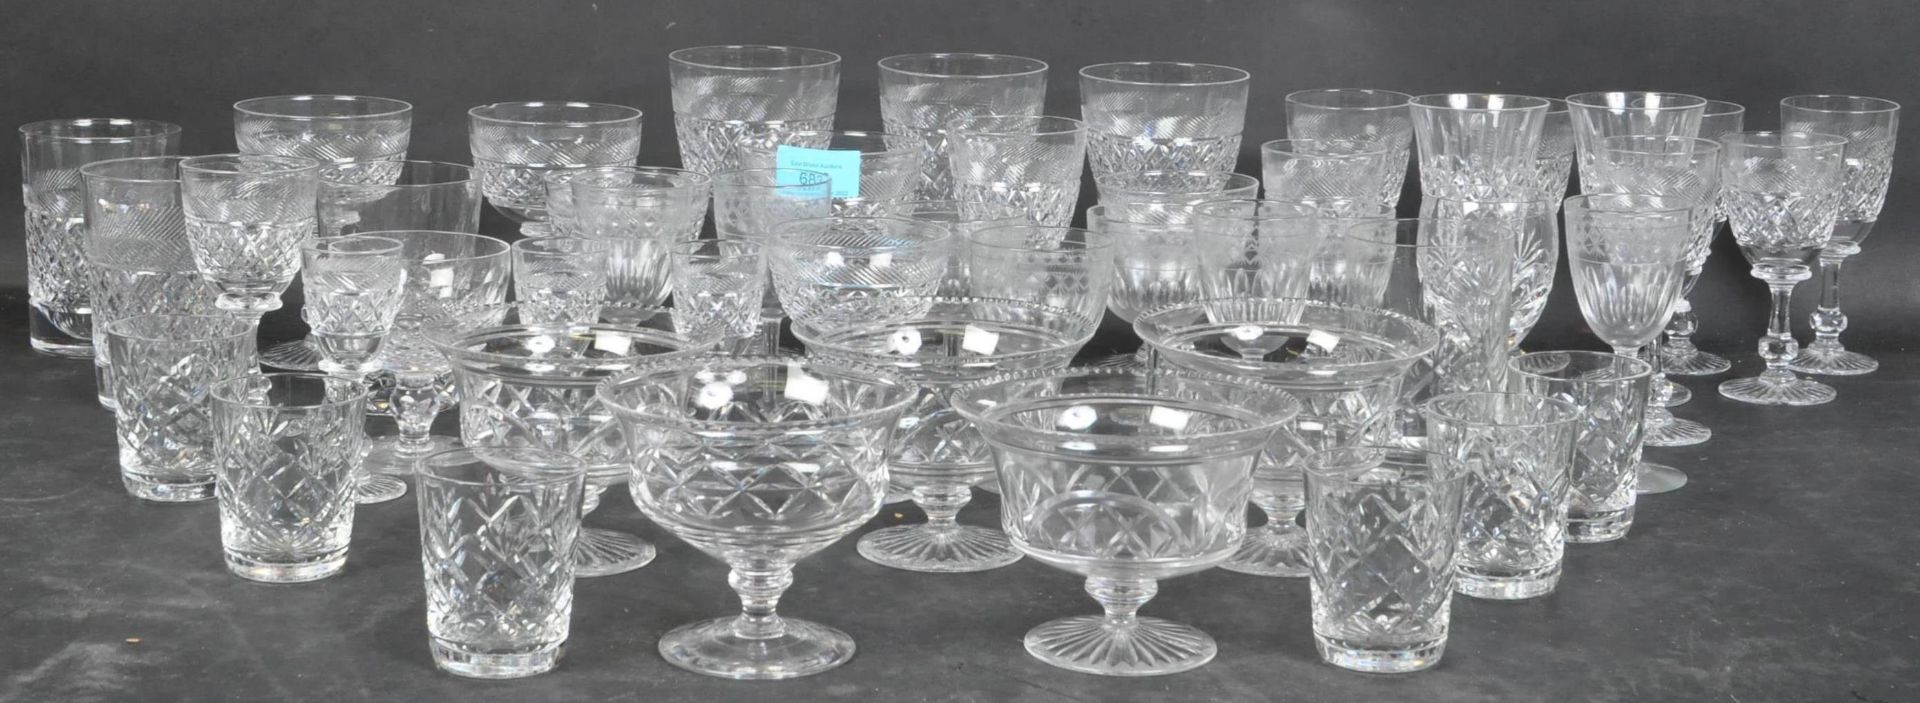 COLLECTION OF VINTAGE ENGLISH LEAD CUT GLASS DRINKING GLASSES